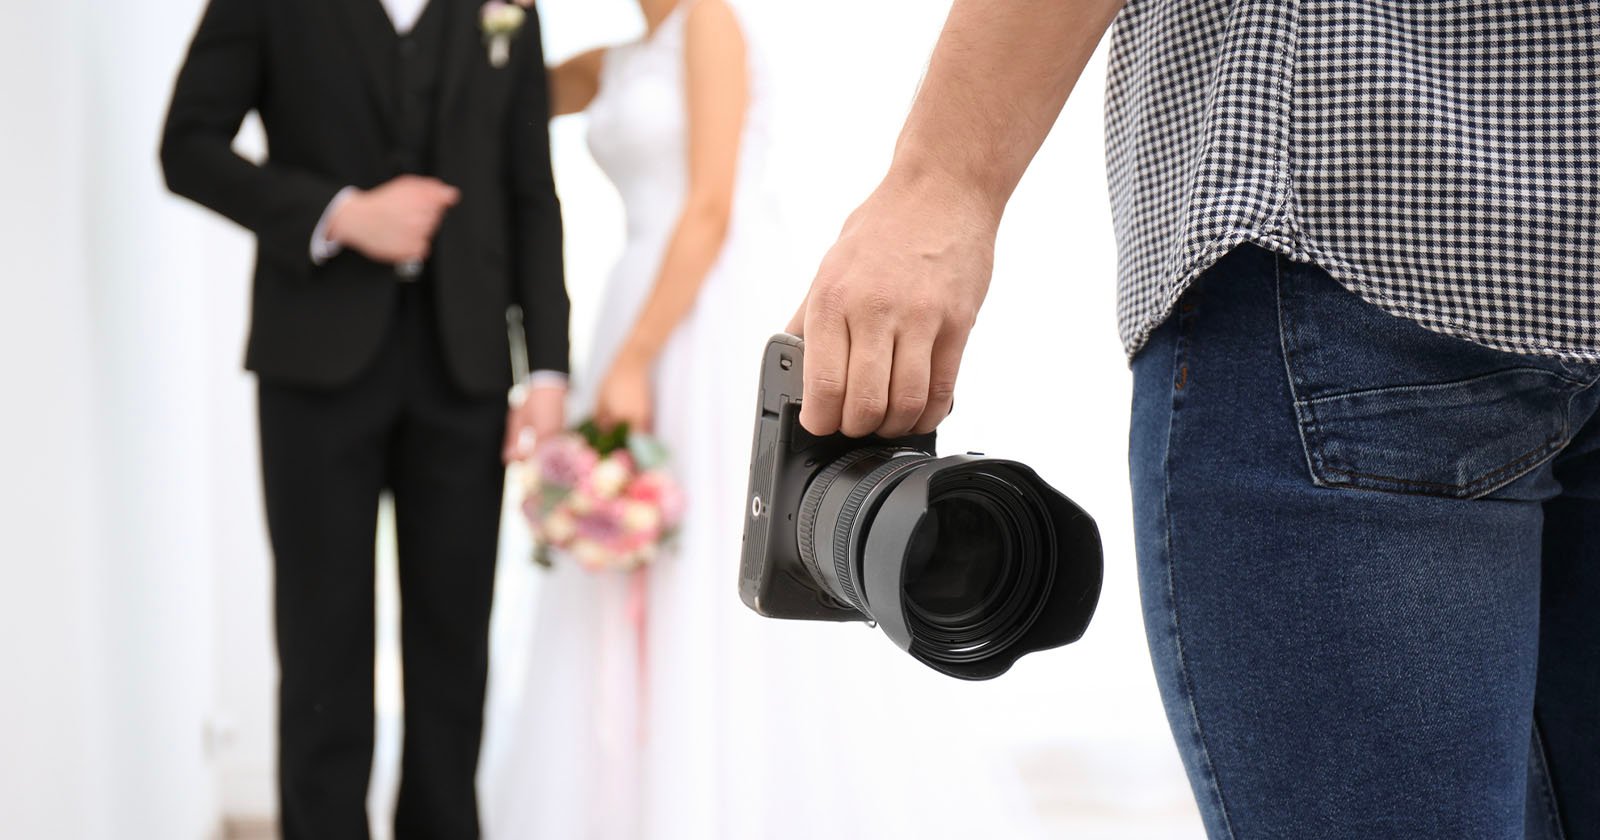  wedding photographer flees country leaving couples 